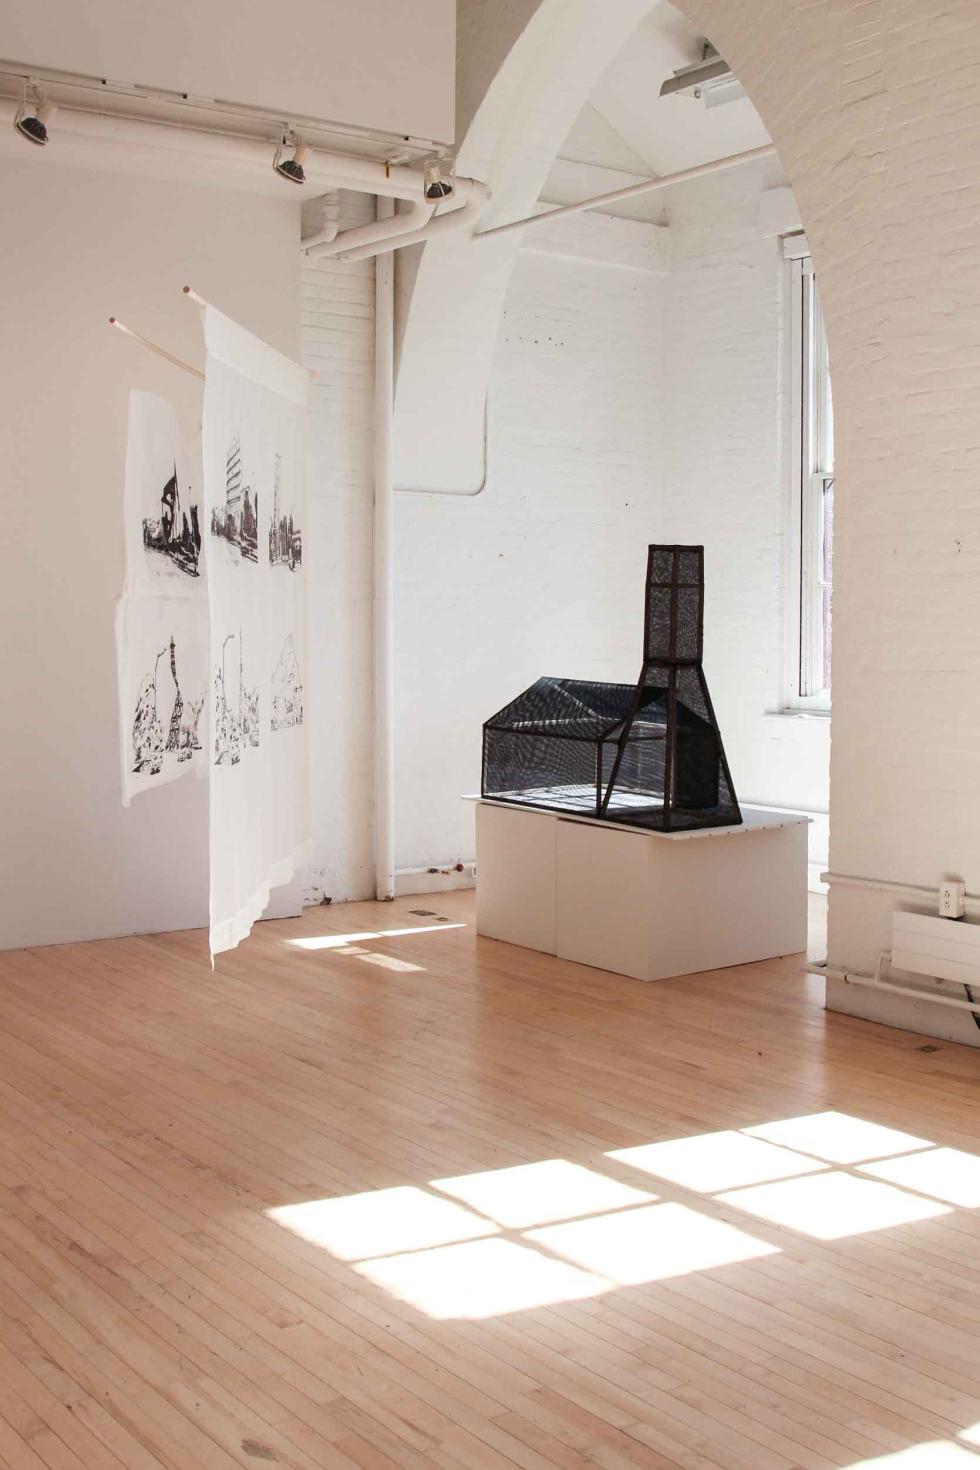 Two white banners with four black images printed on them hanging next to a black transparent building model in a white room.